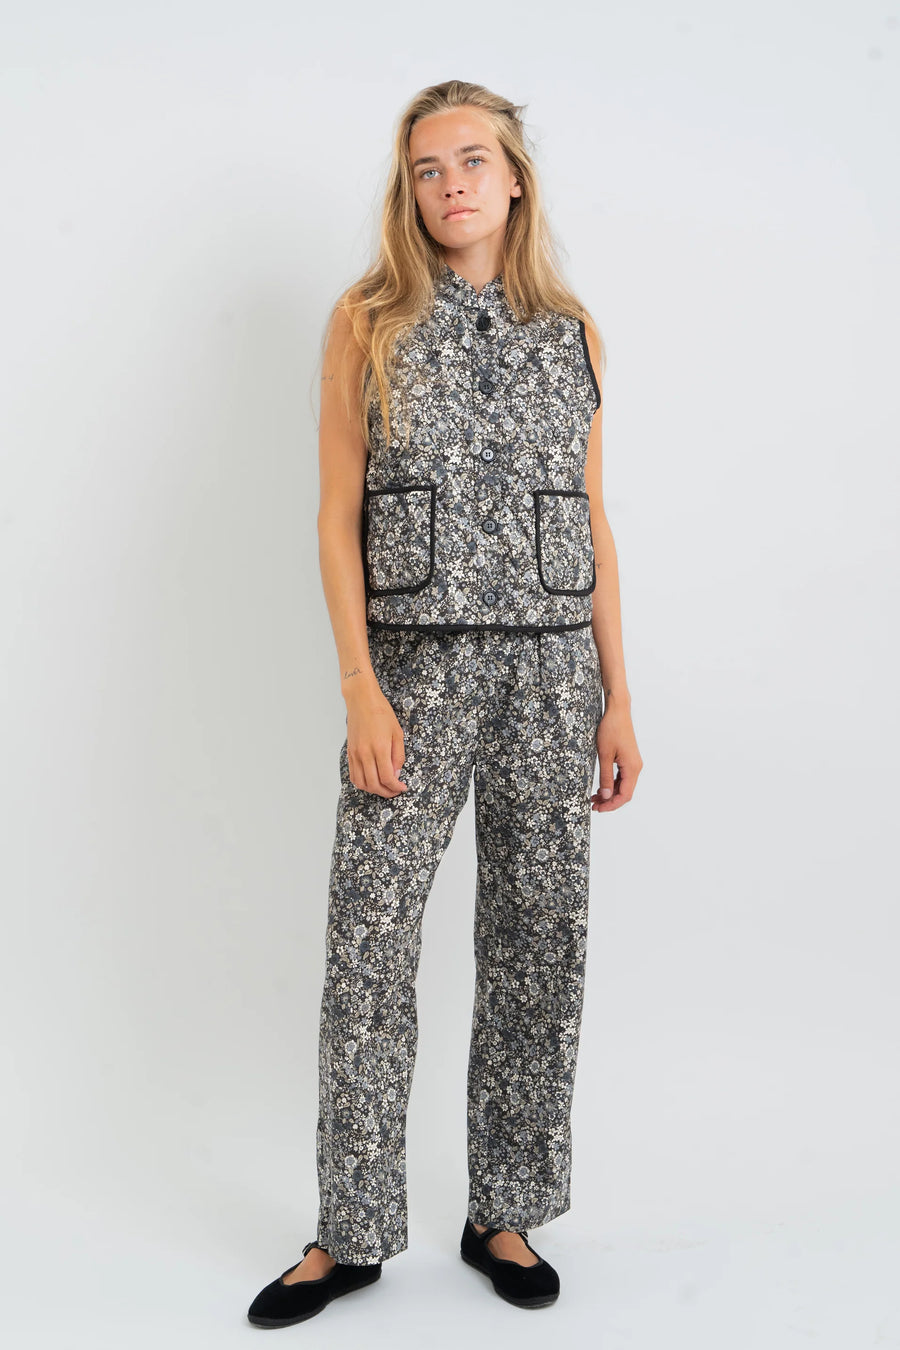 Lollys Laundry Bill Floral Cotton Trousers